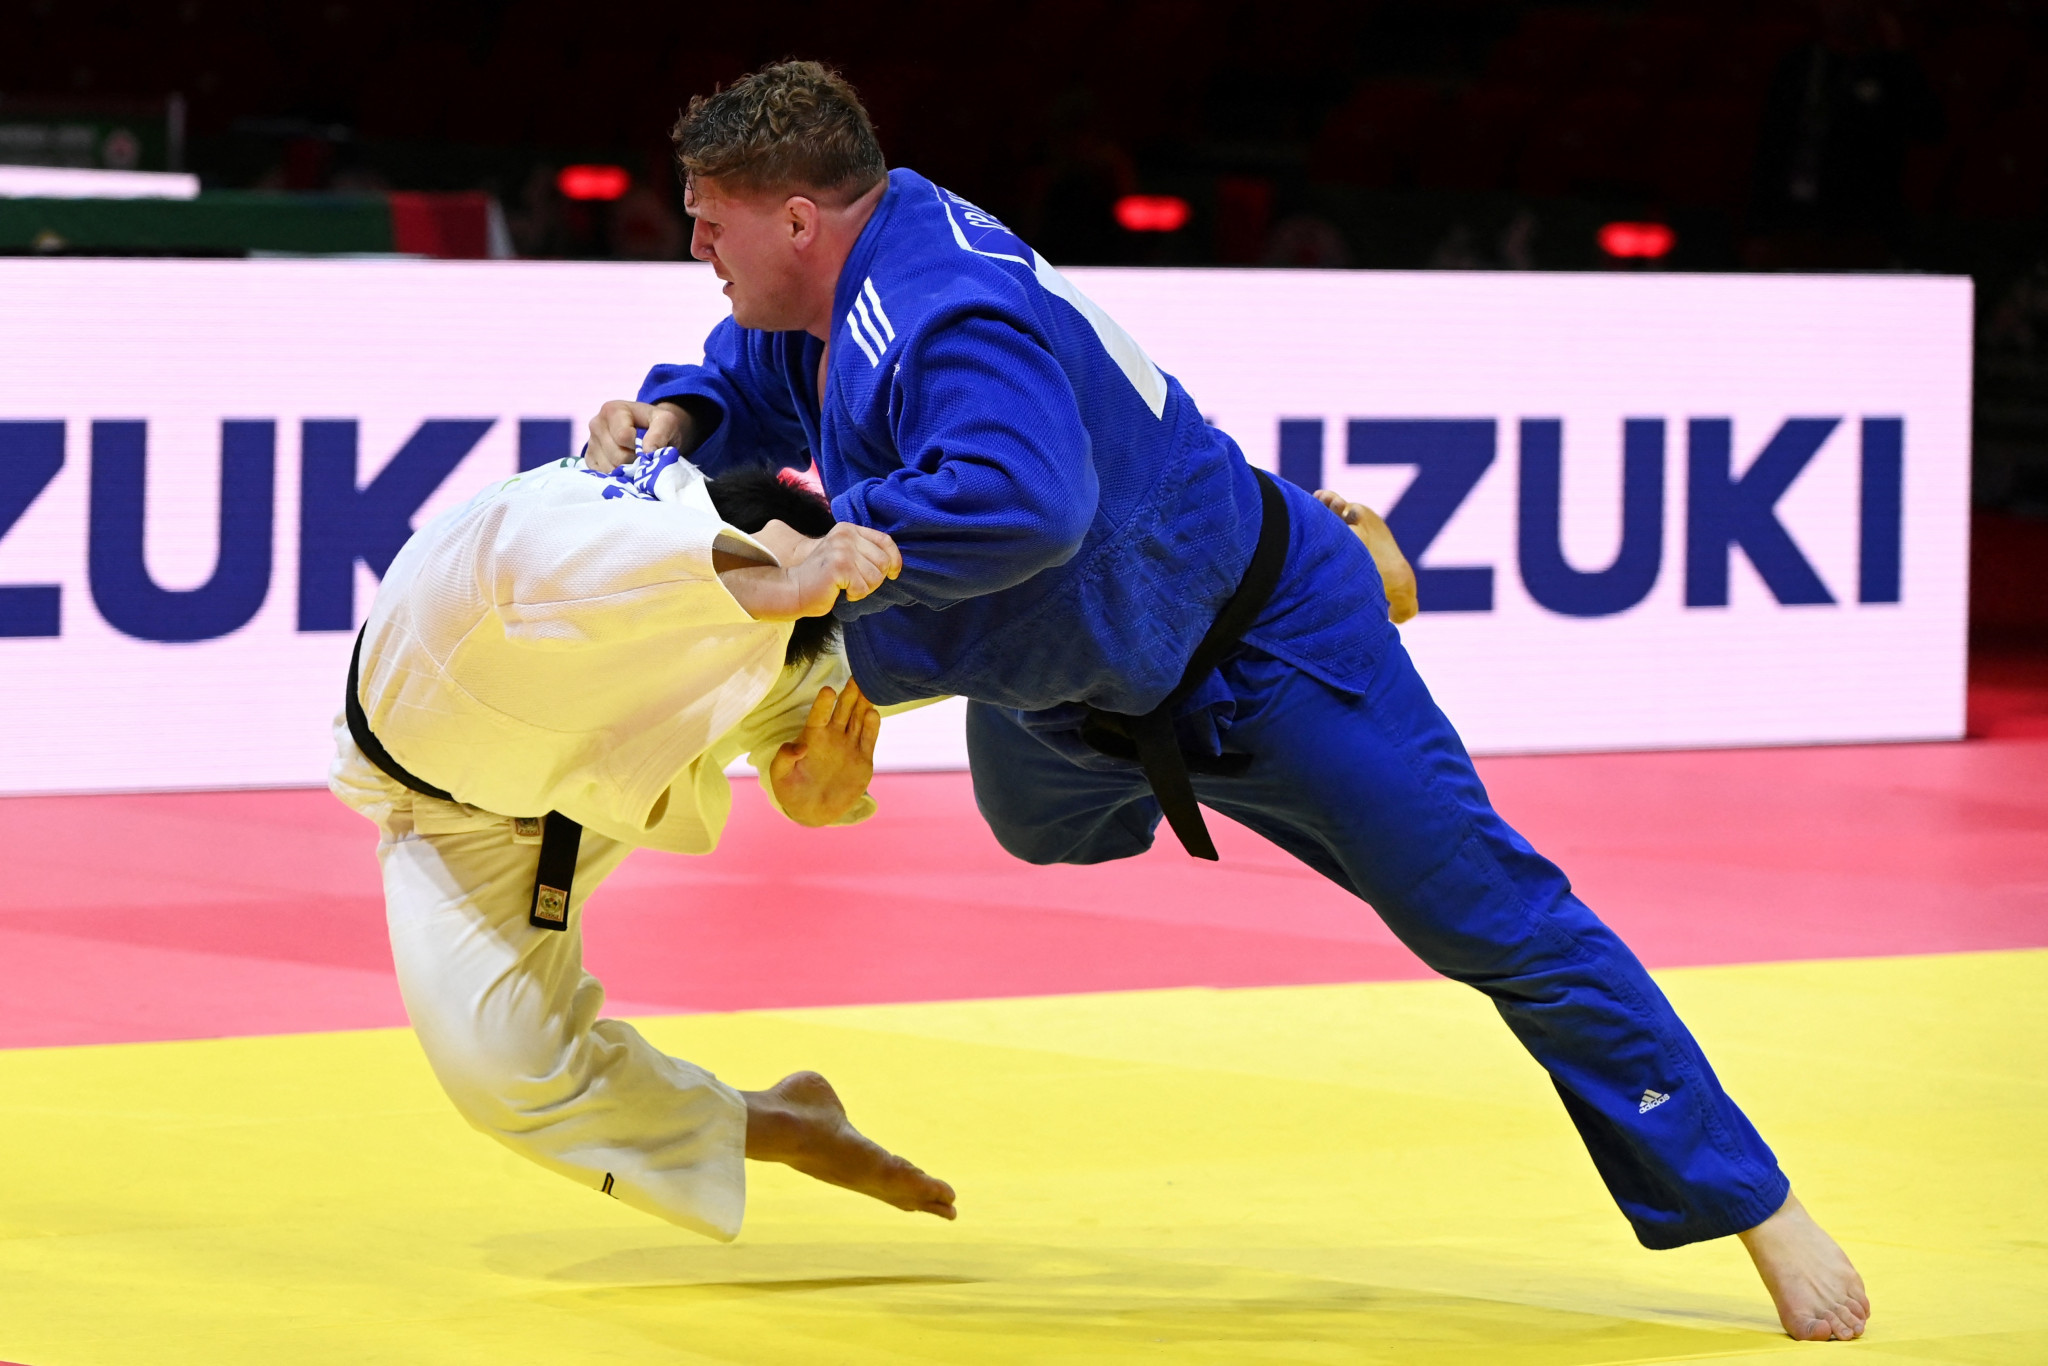 Jur Spijkers, right, secured gold in the men's over-100kg tournament in Zagreb ©Getty Images